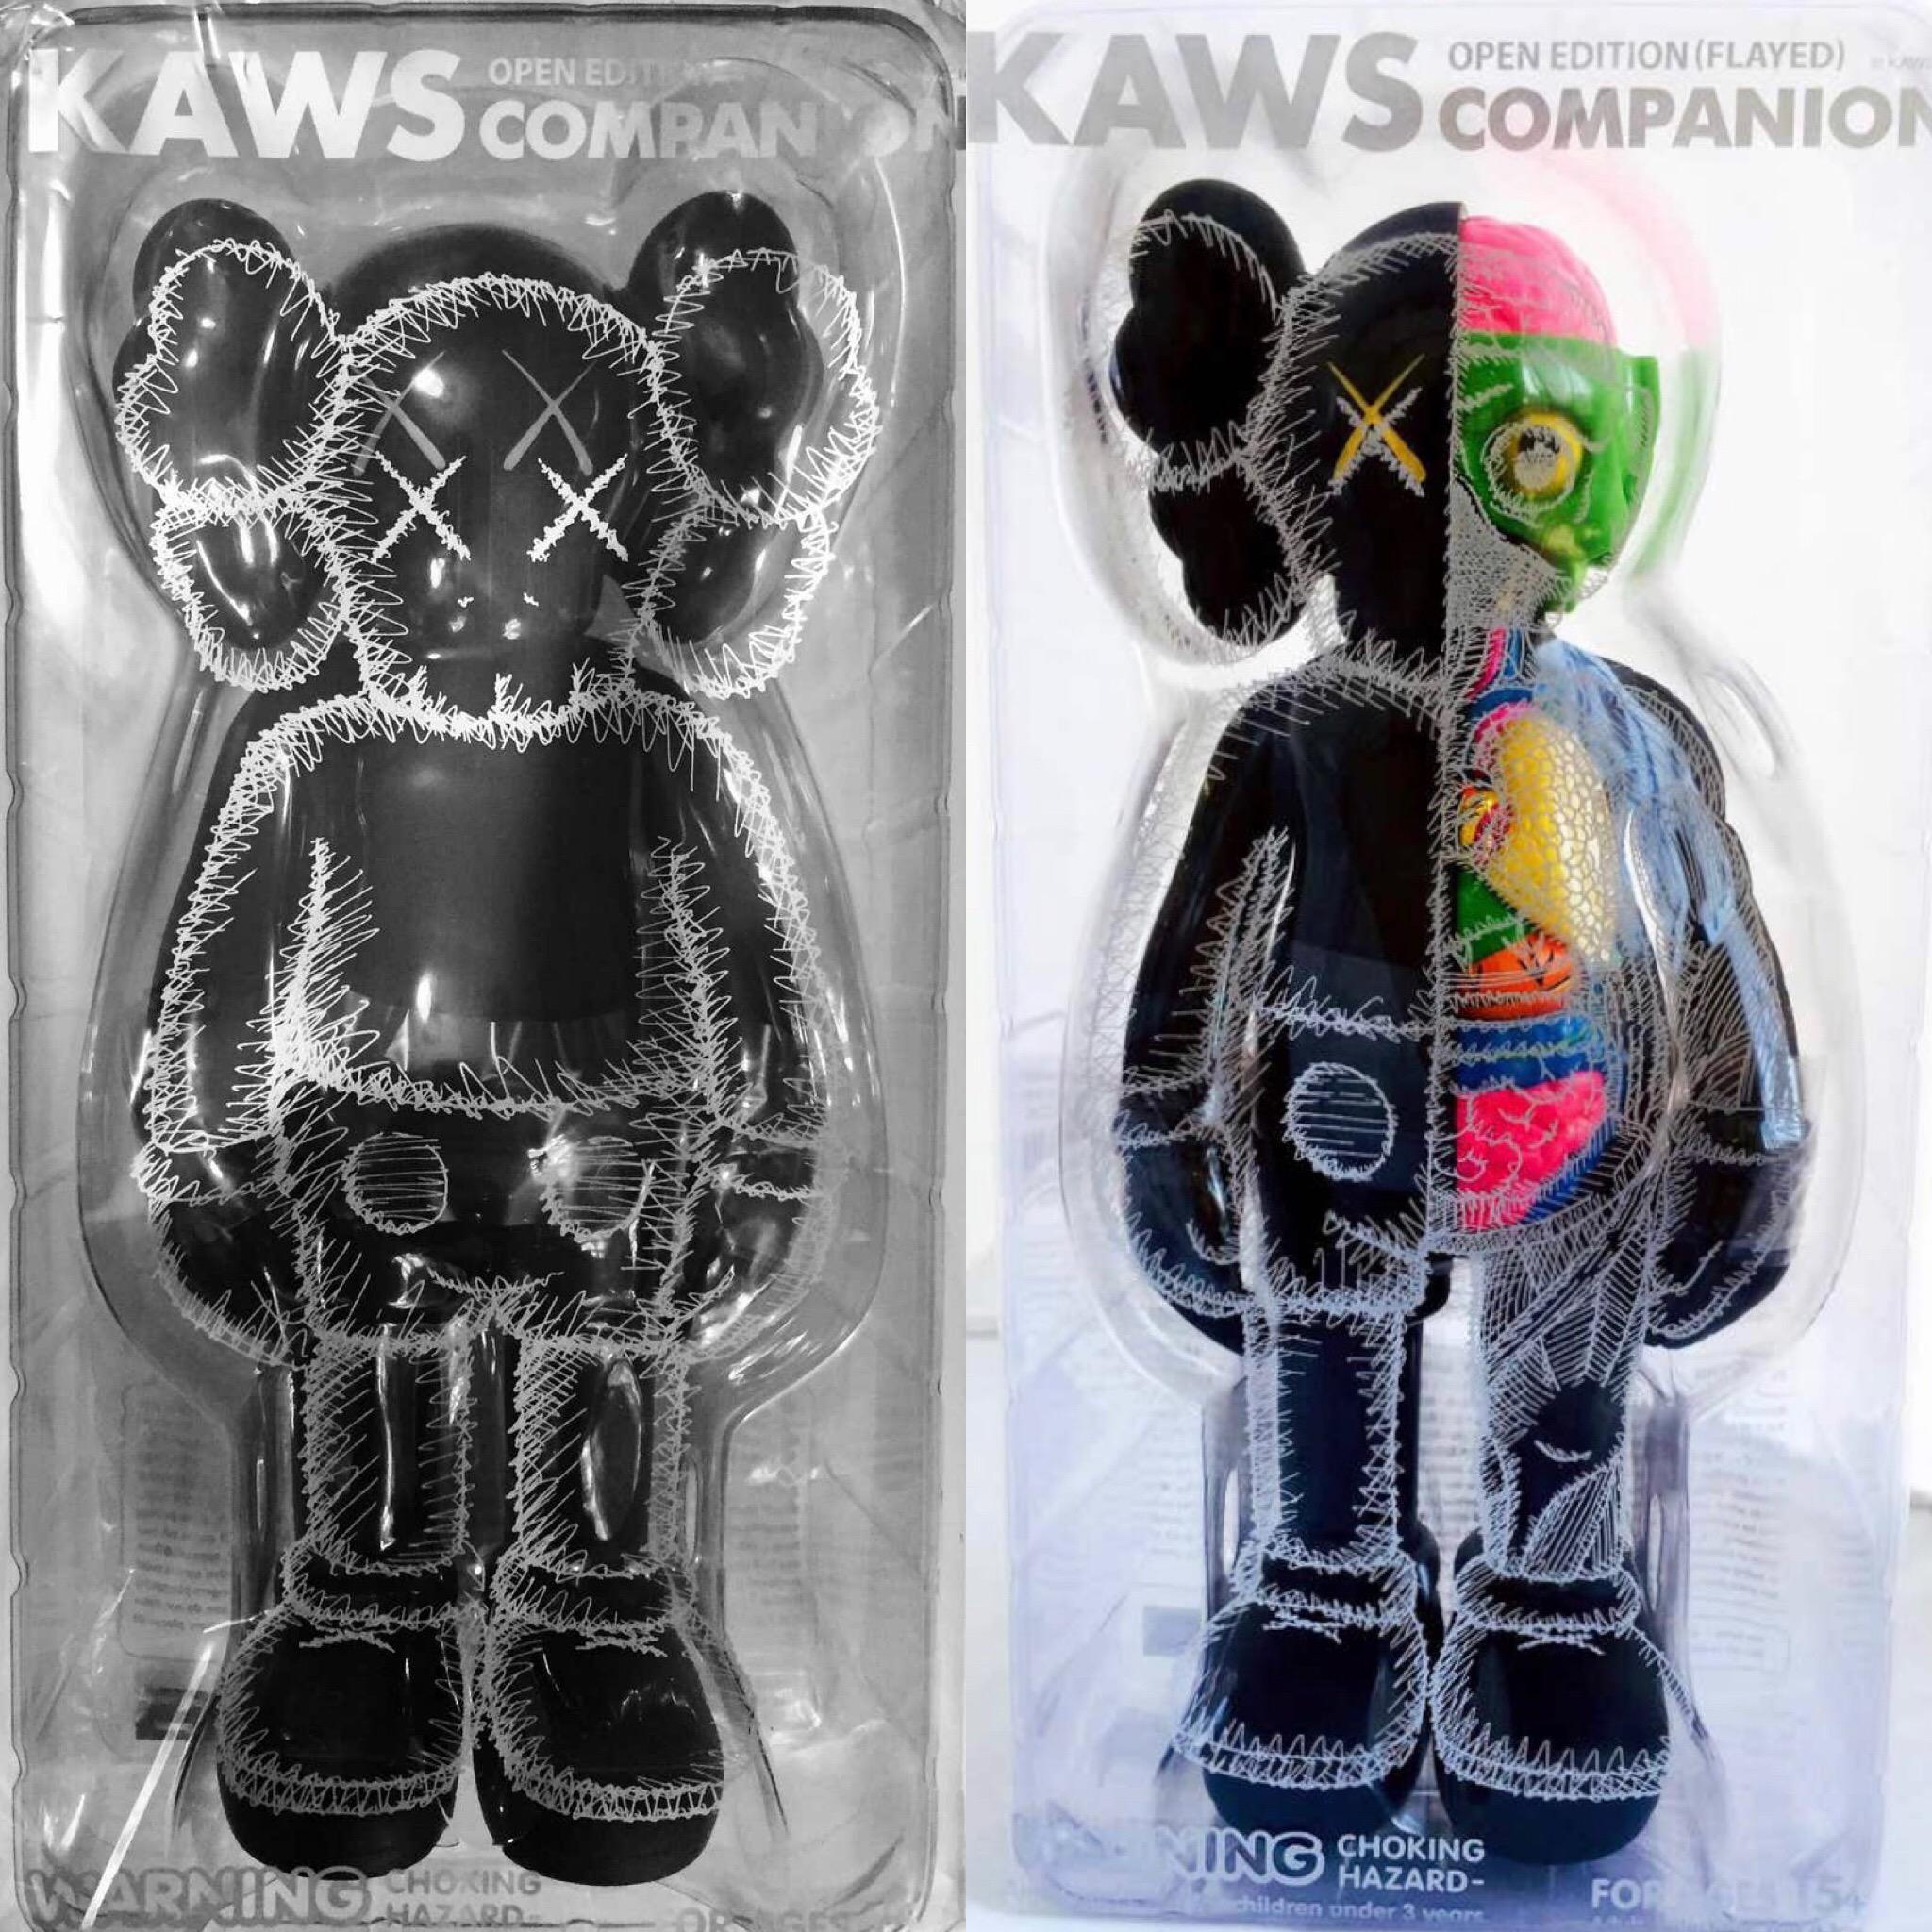 KAWS Companion, Black Flayed & Black full body 2016 (set of 2 individual pieces). Each new and sealed in original packaging. Published by Medicom Japan in conjunction with the exhibition, KAWS: Where The End Starts at the Modern Art Museum of Fort